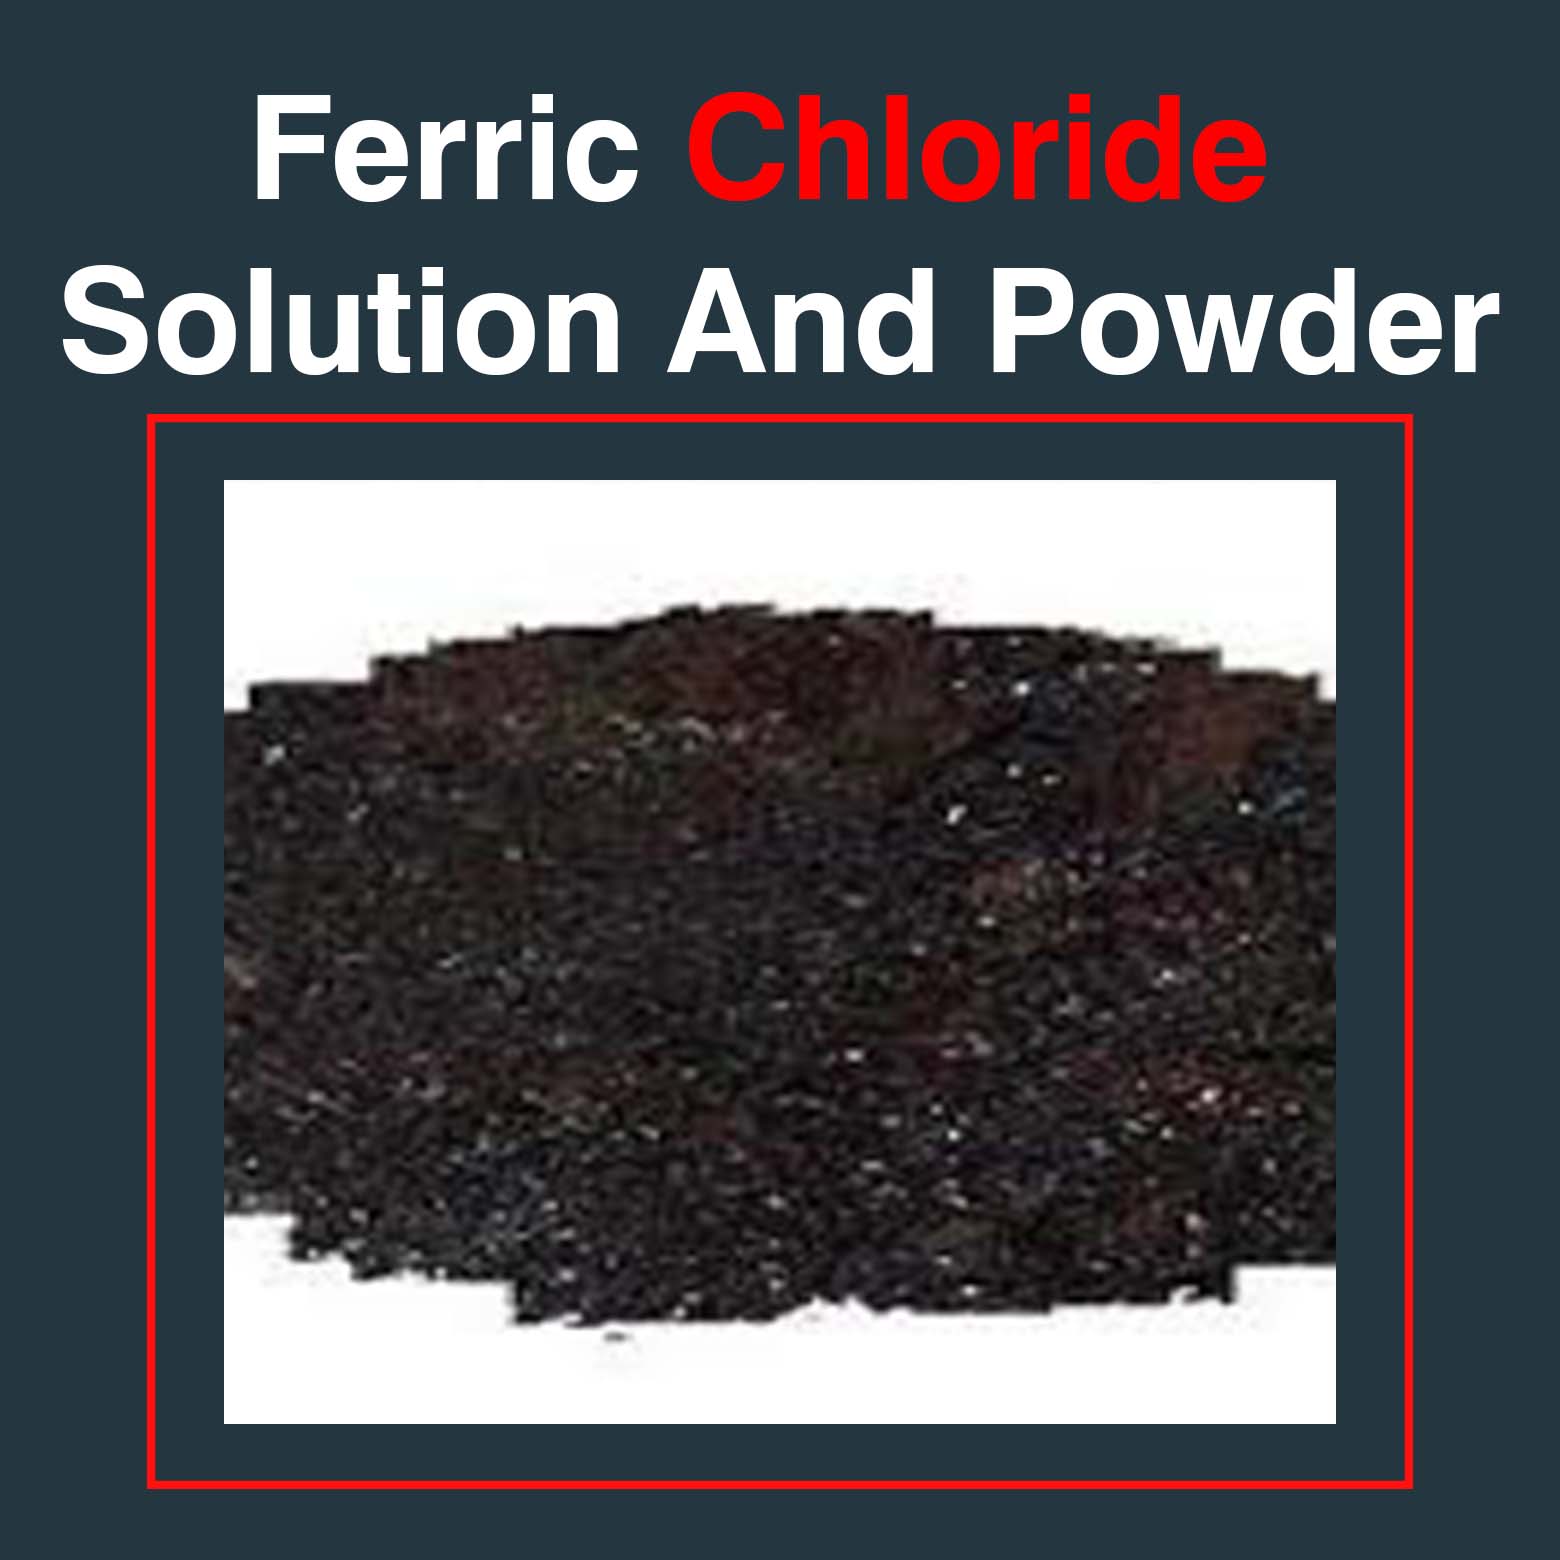 Ferric Chloride Solution And Powder In Spain